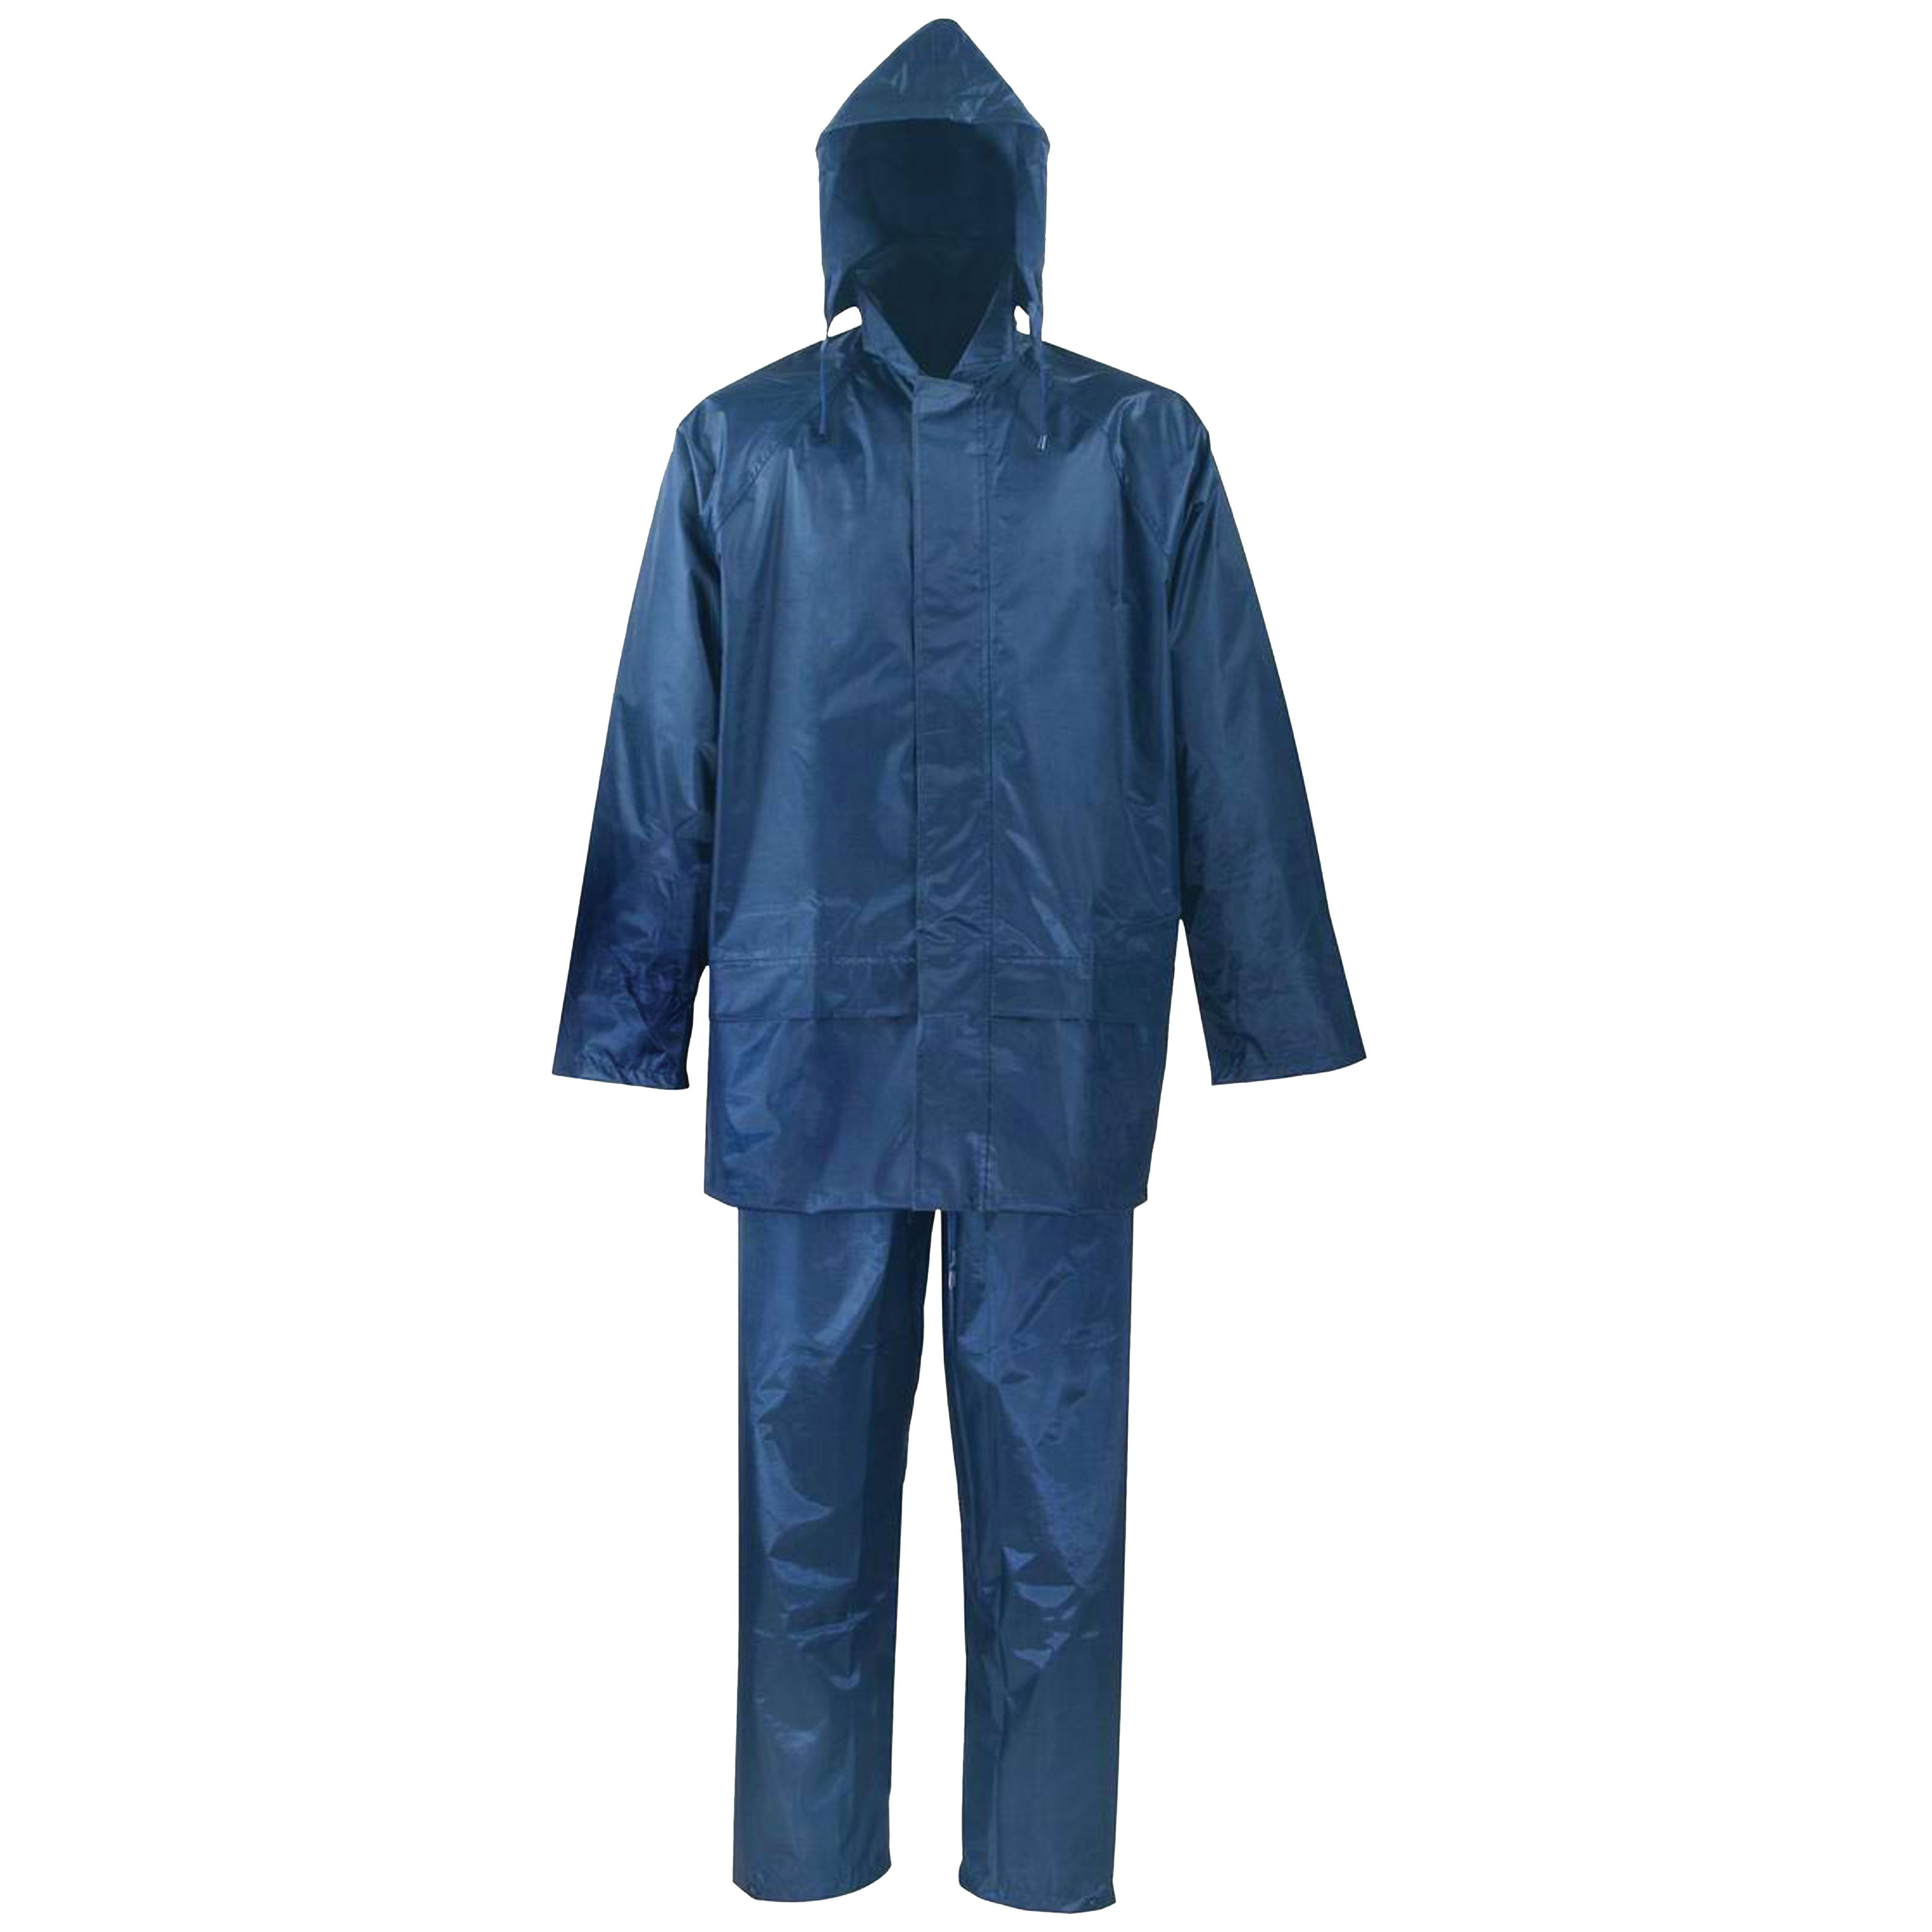 SPU045-XXL Rain Suit, 2XL, 31-1/2 in Inseam, Polyester, Blue, Drawstring Pull-Out Hood Collar